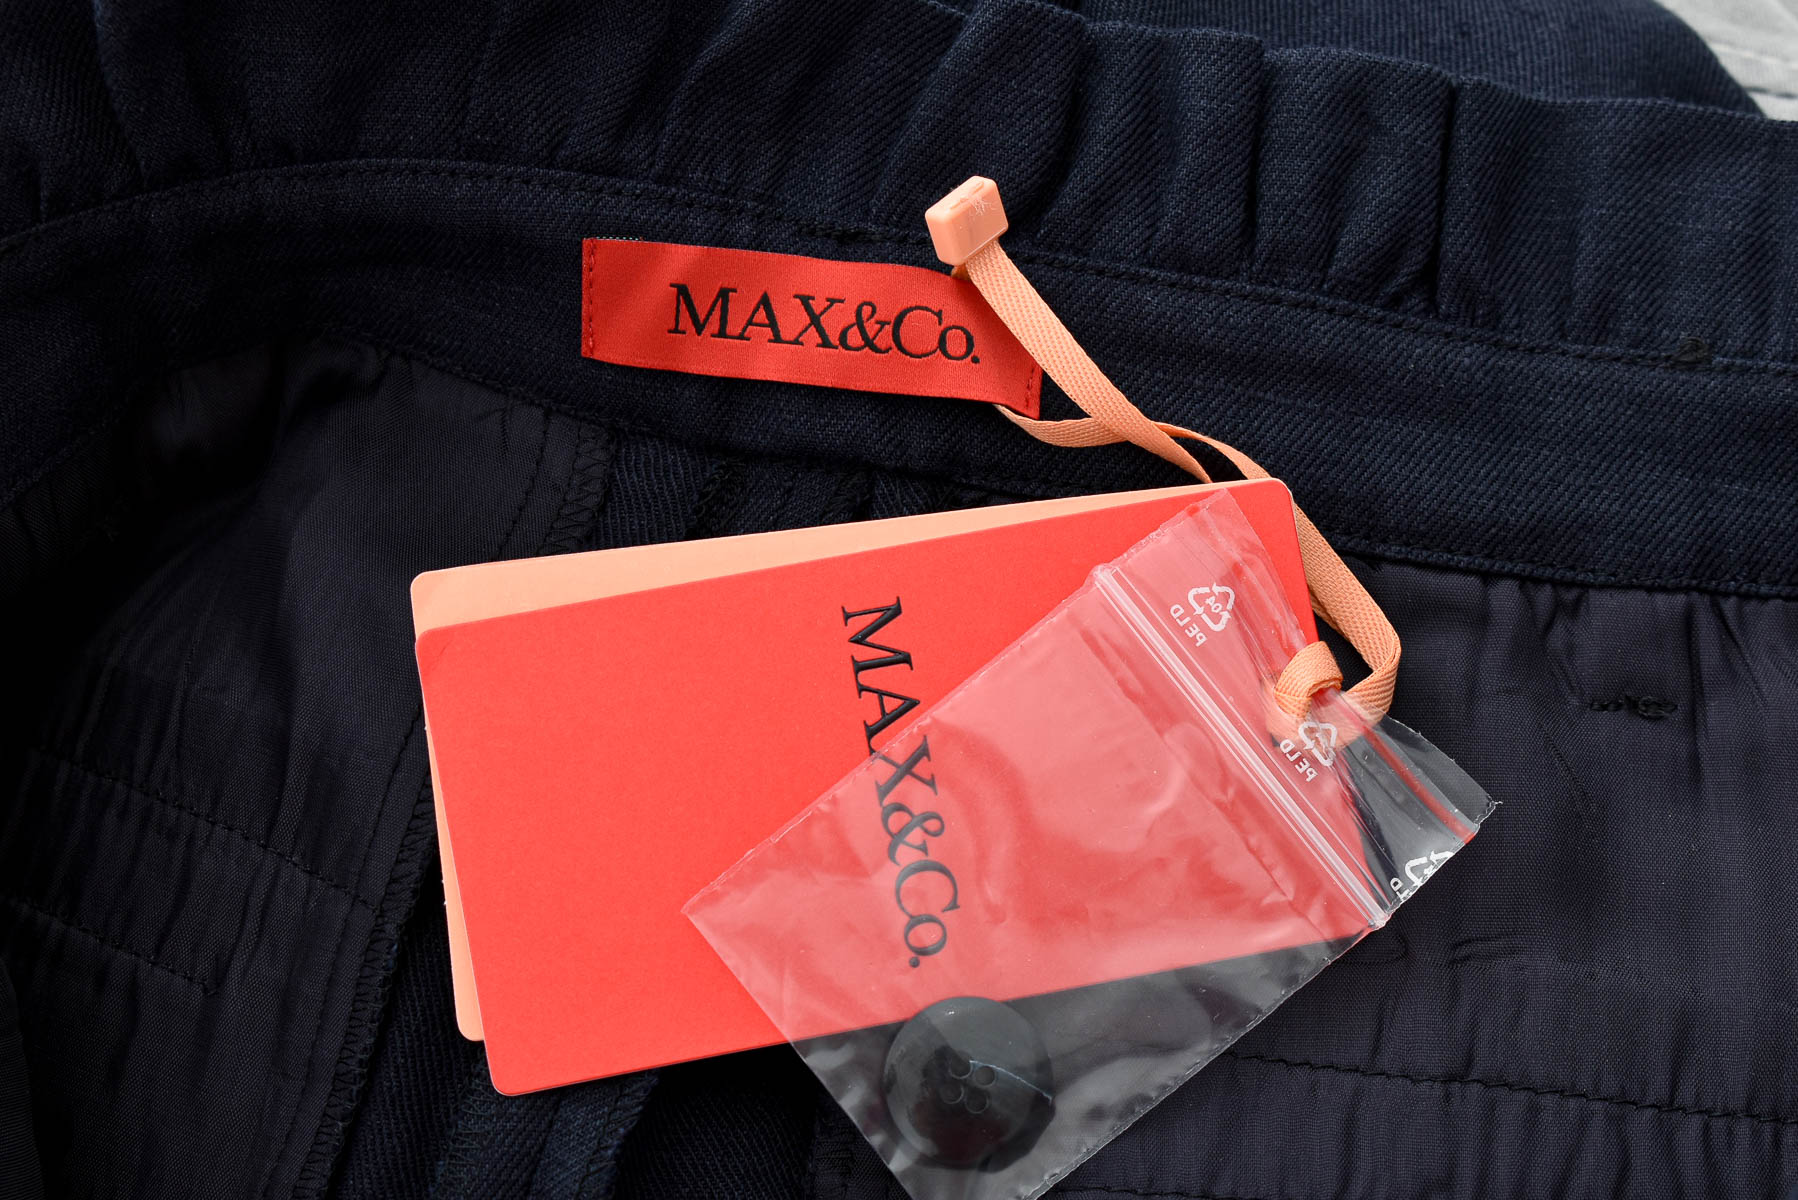 Women's trousers - Max & Co - 2